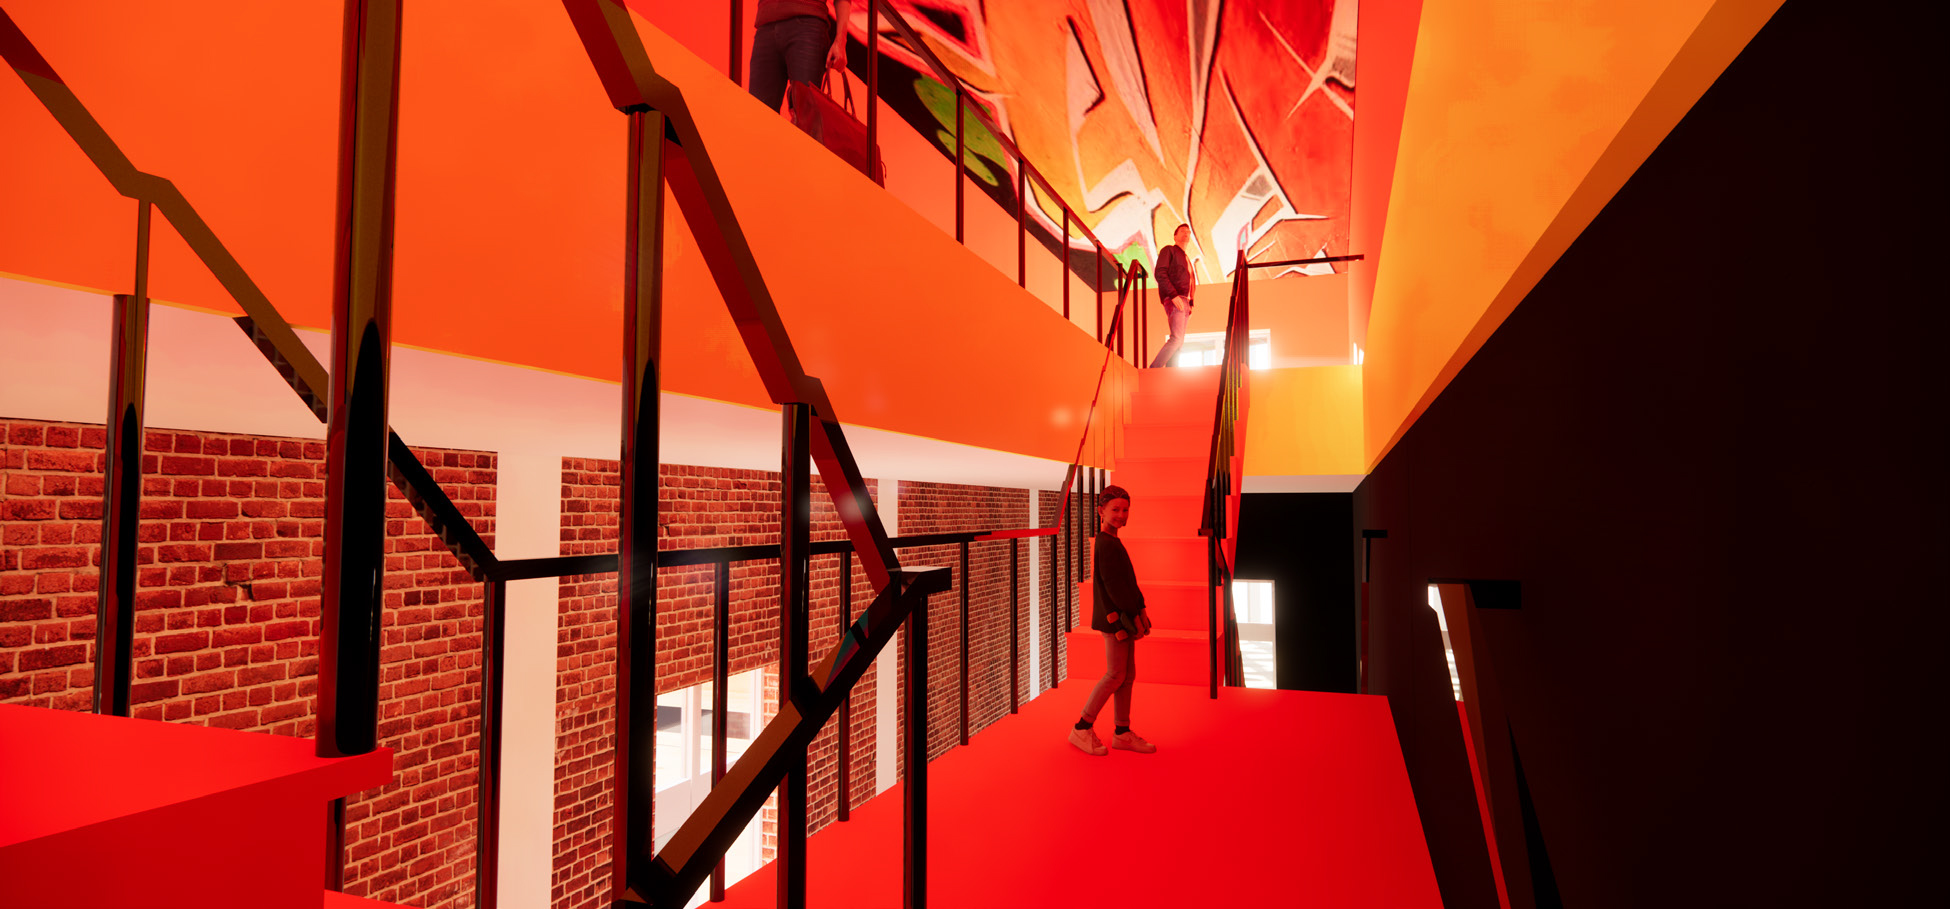 person standing in orange stairwell